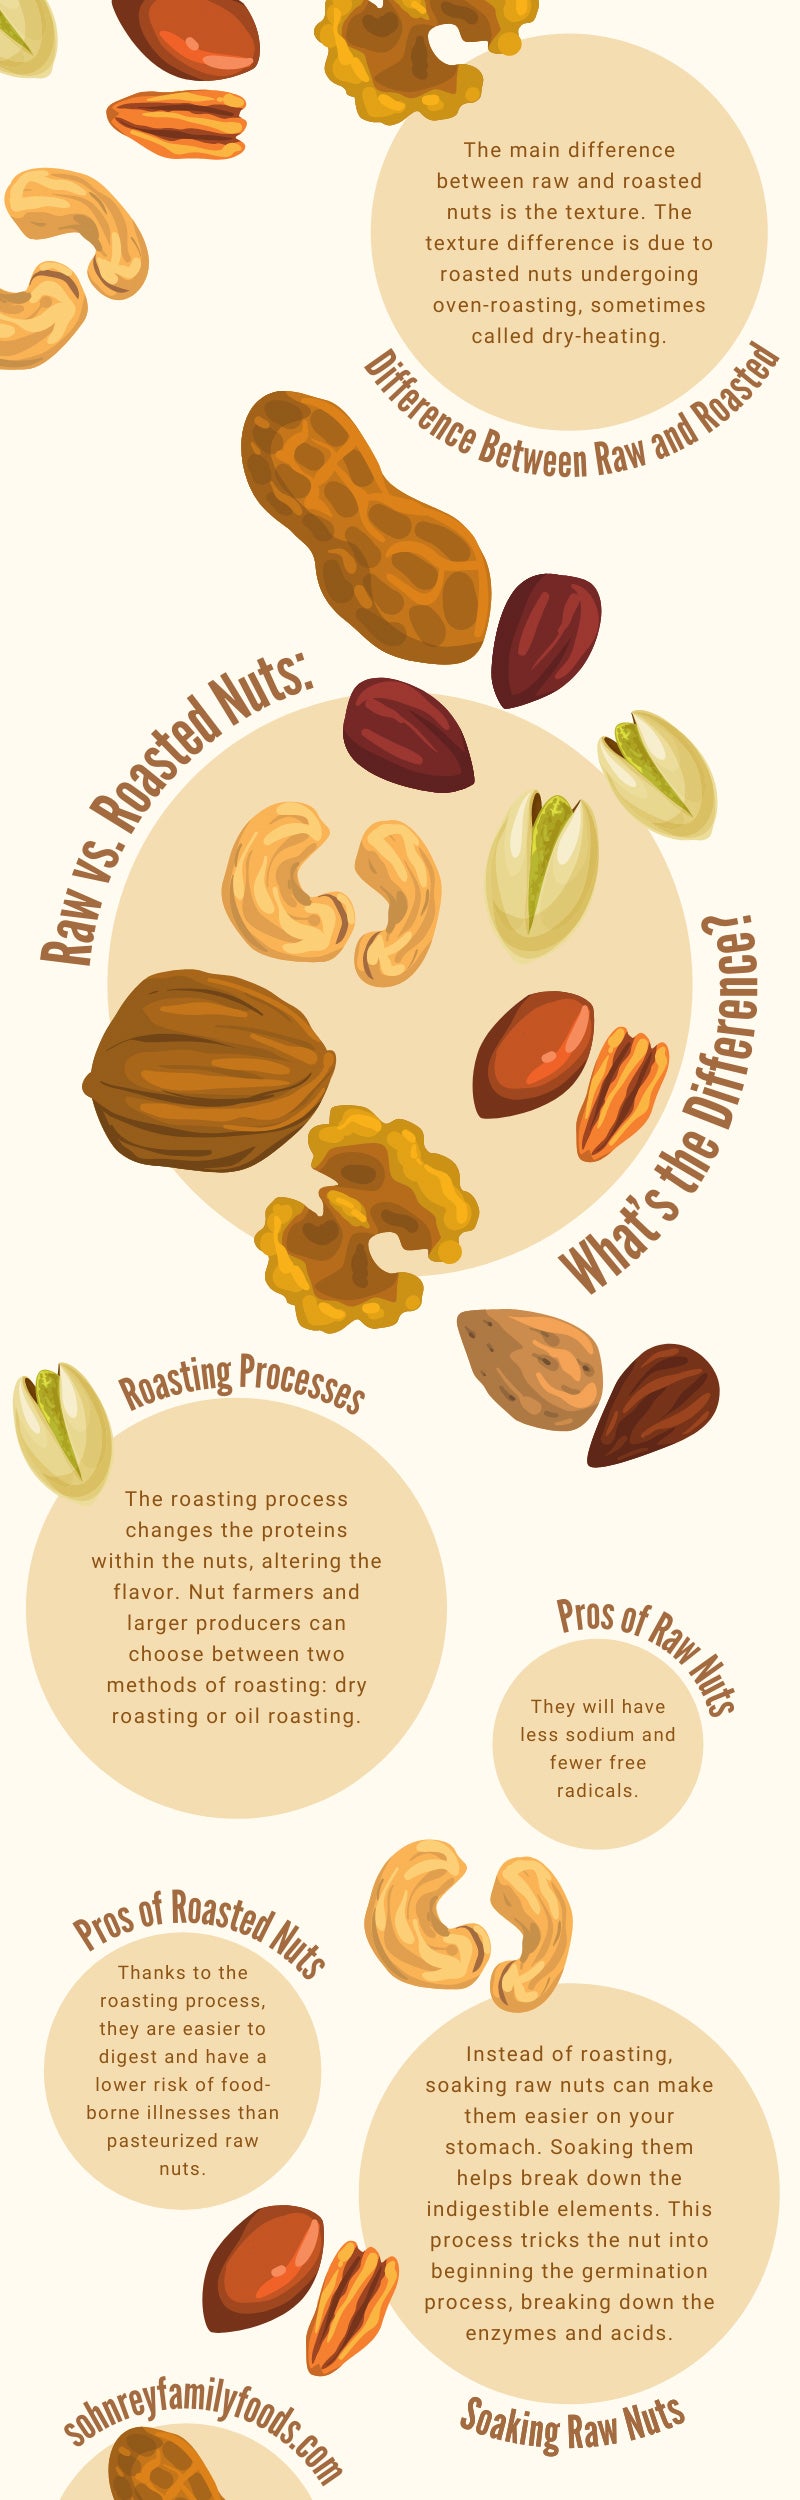 Raw vs. Roasted Nuts: What's the Difference?